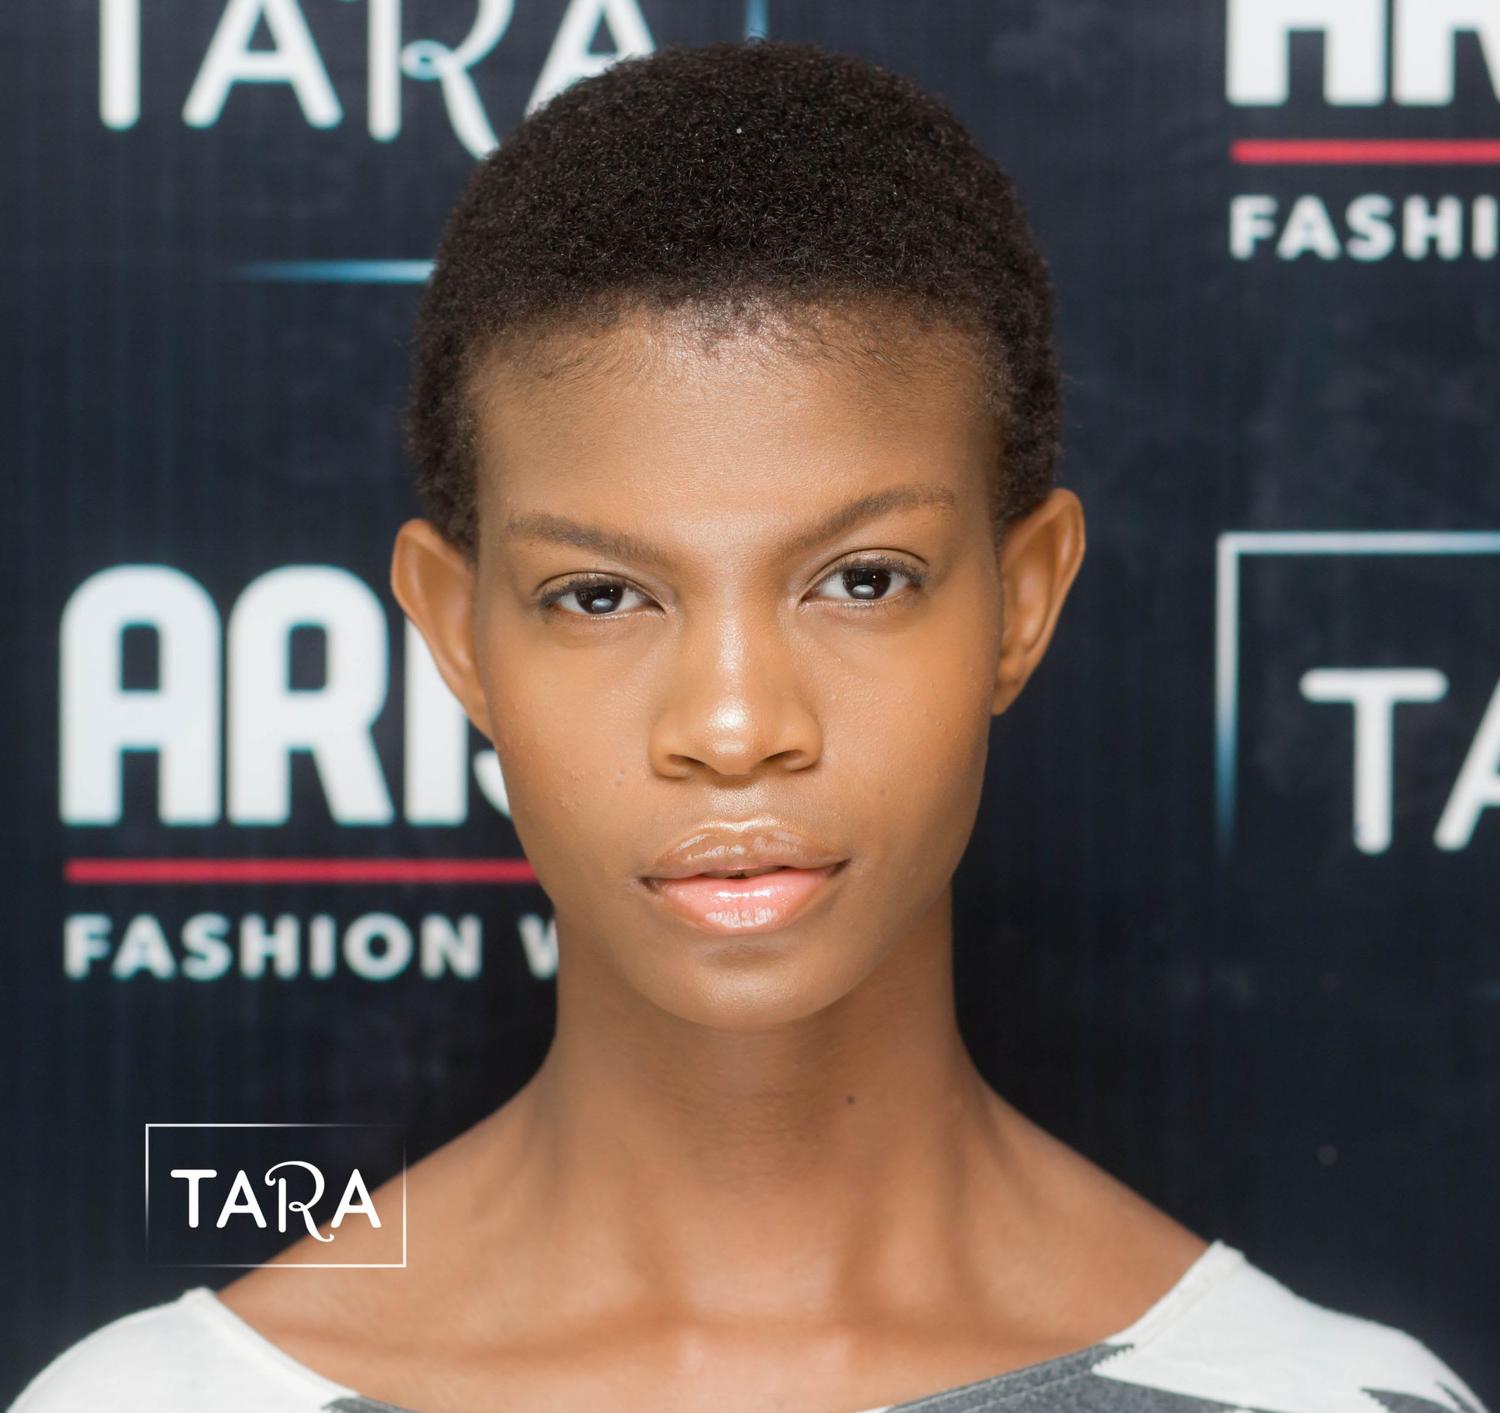 This Is How You Do Runway Beauty, According to House of Tara